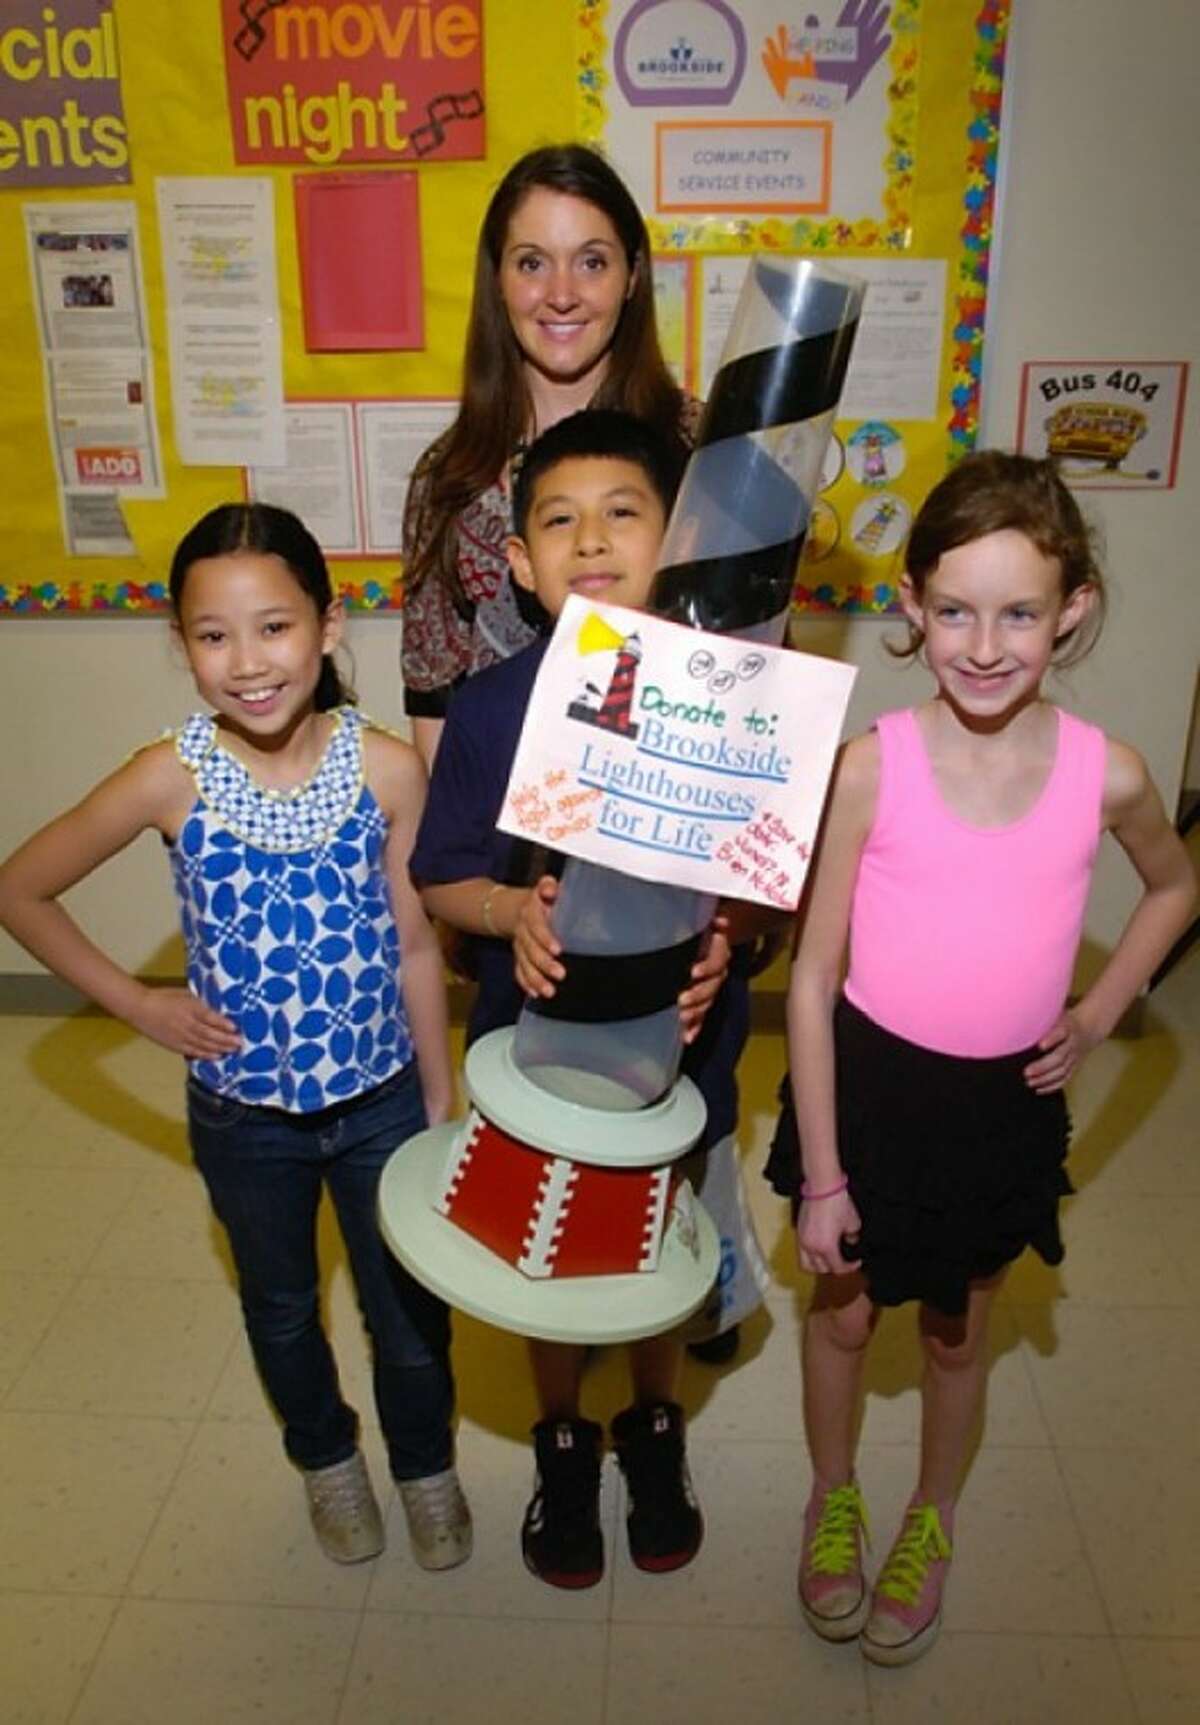 Brookside Elementary School 2nd grade teacher Jennifer Sweeters and 3rd graders Briana Maranon, Andy Velazquez and Caroline Petropolous lead the Brookside Lighthouse for Life team raising money for Relay for Life. Hour photo / Erik Trautmann